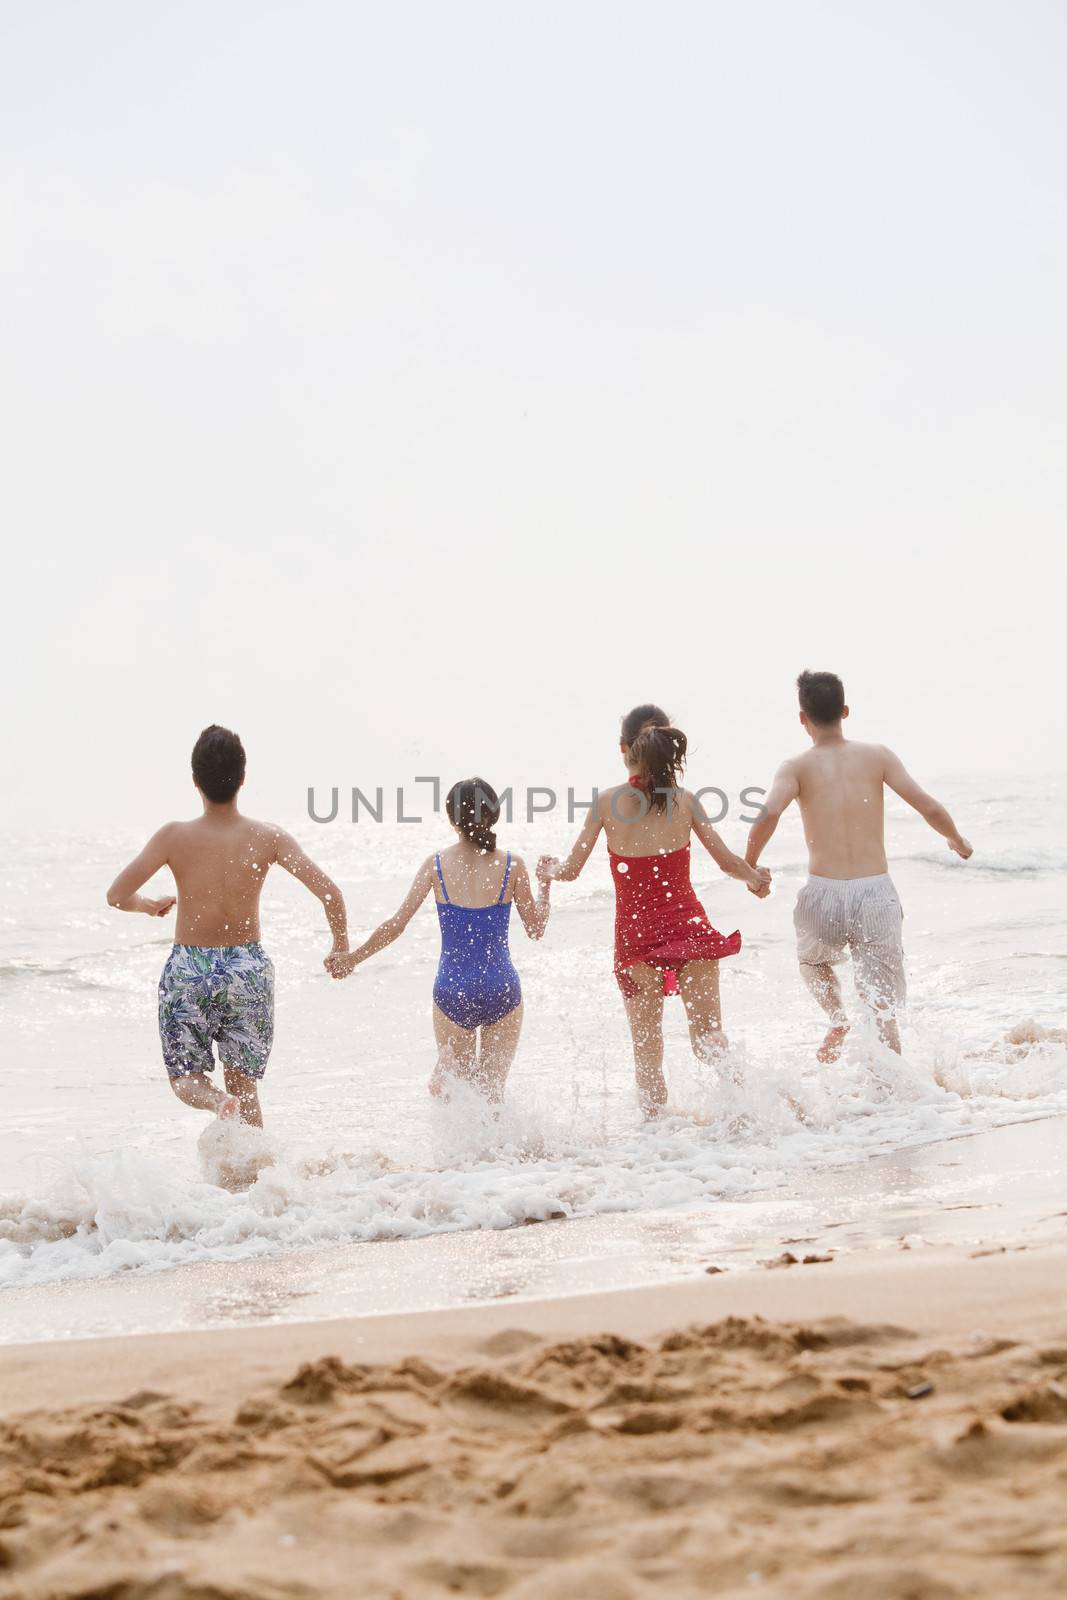 Four friends running into the water on a sandy beach, rear view